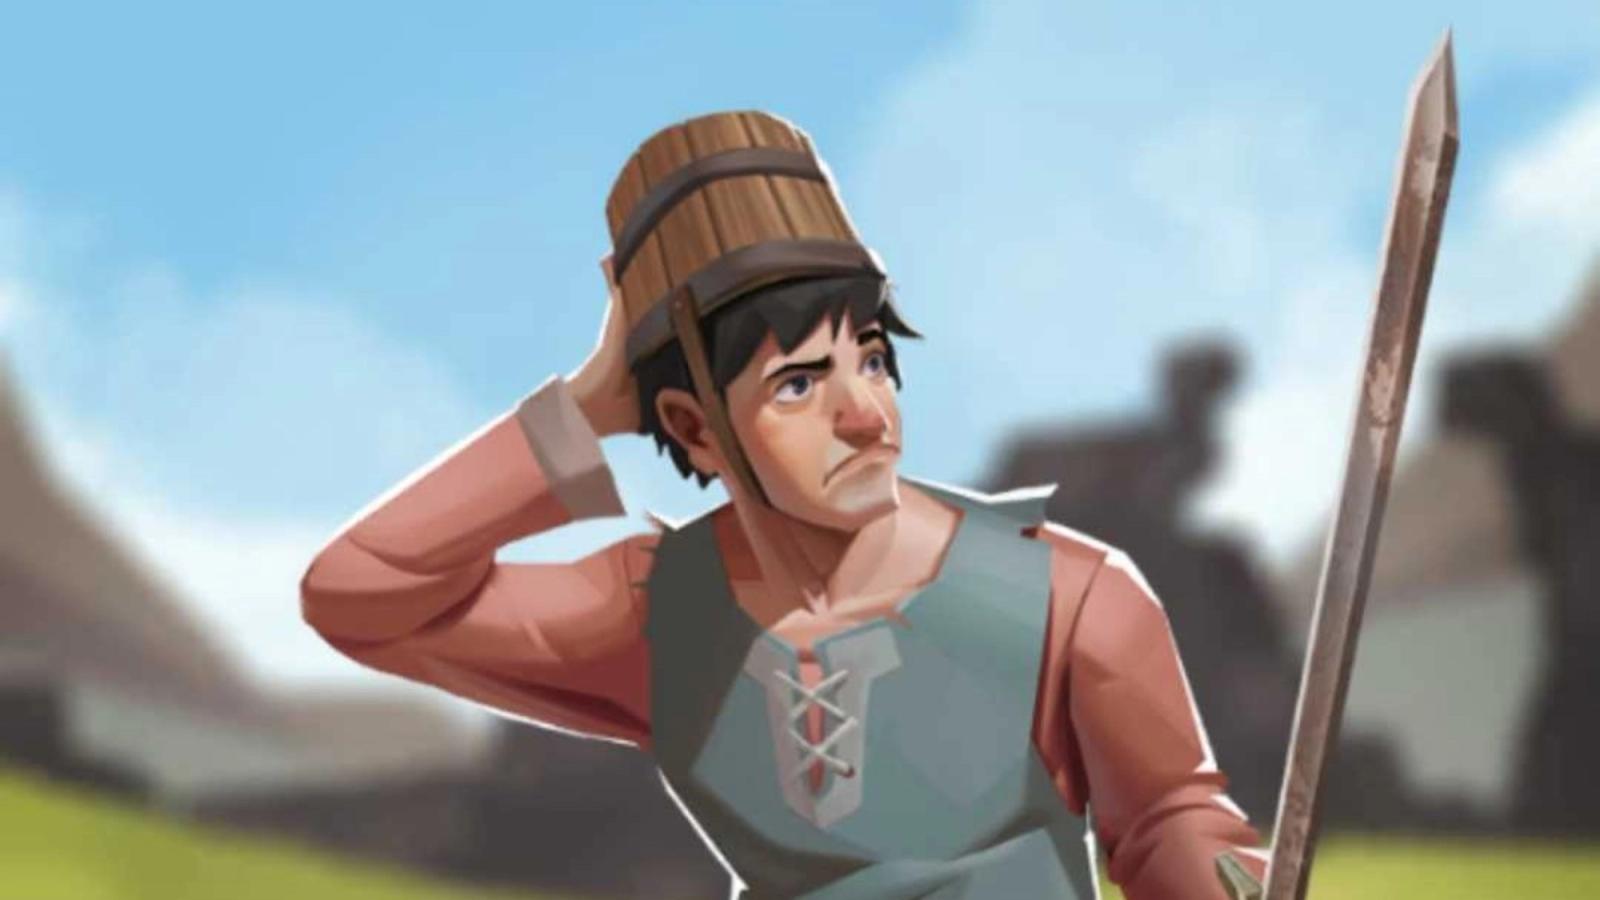 A clumsy man with a bucket on his head in Kingdom Maker